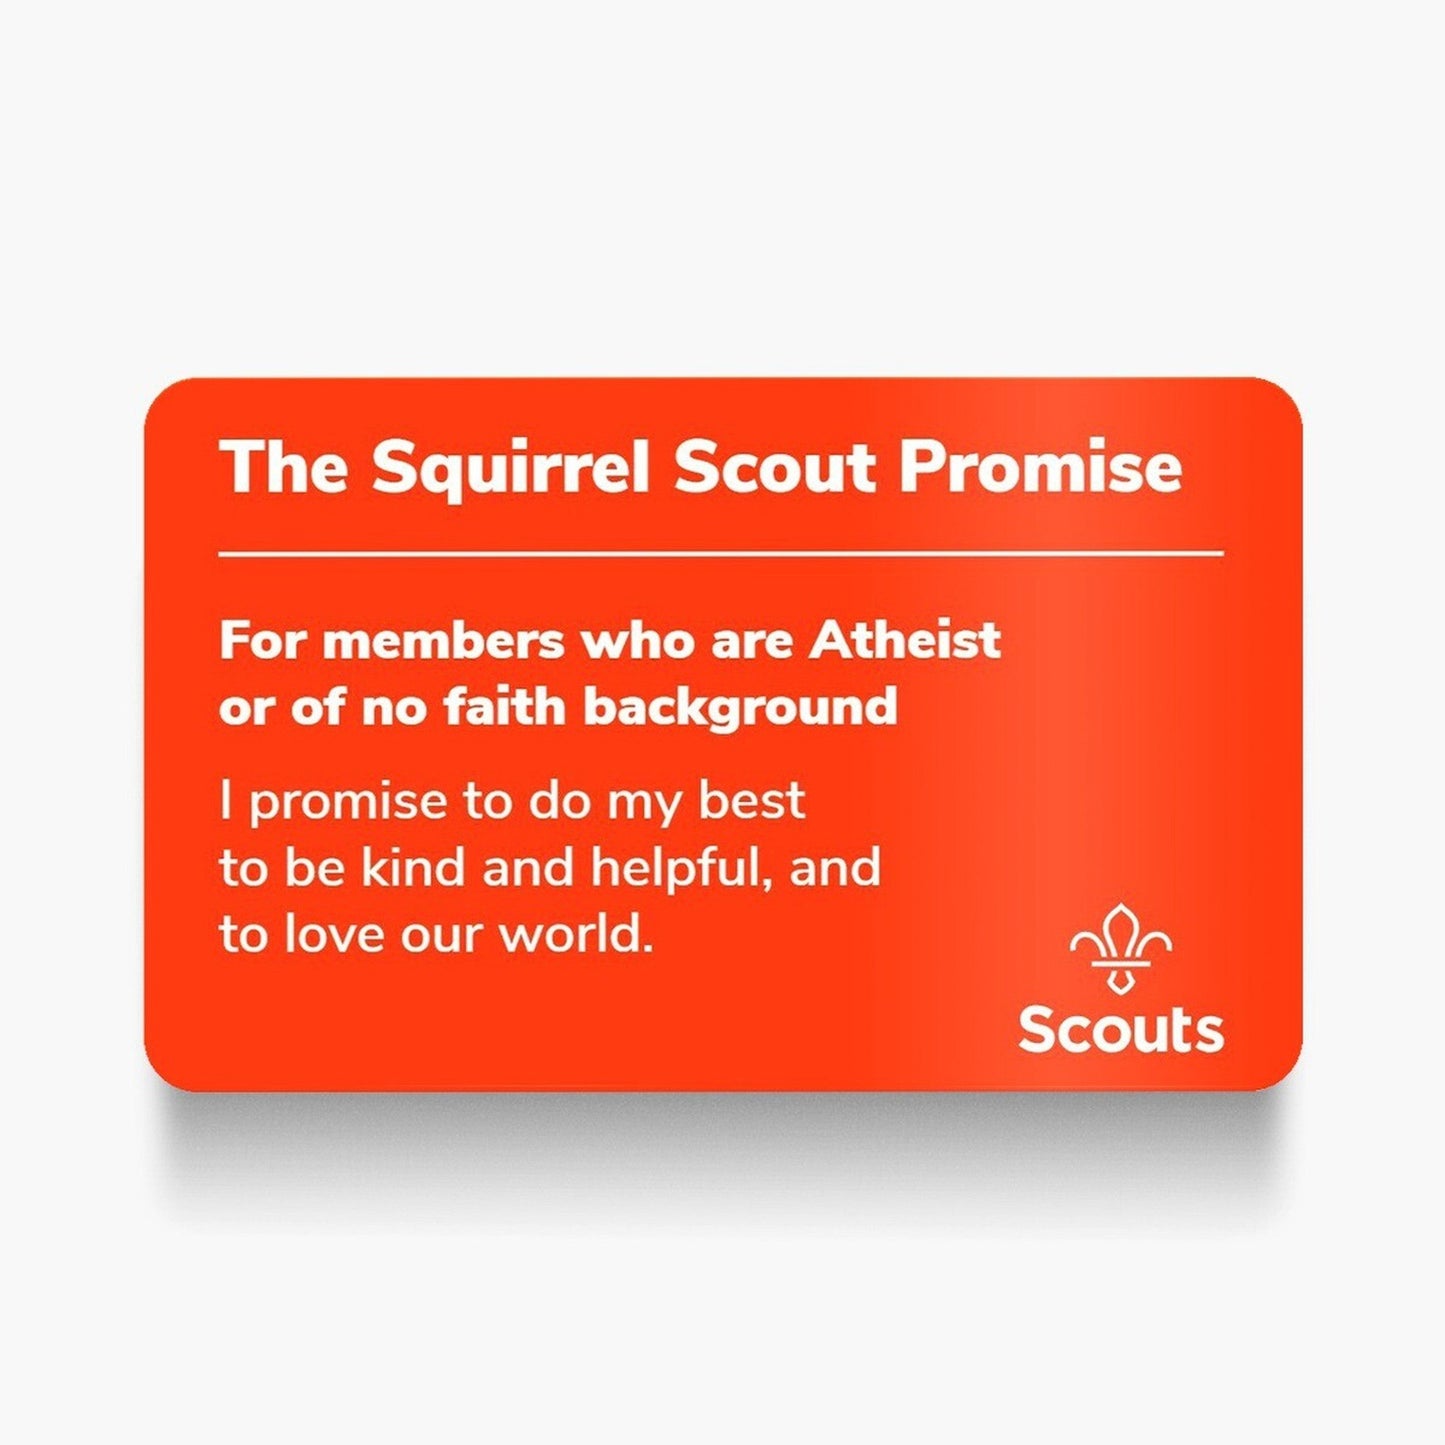 Squirrel Scouts Promise Card - Atheist or No Faith